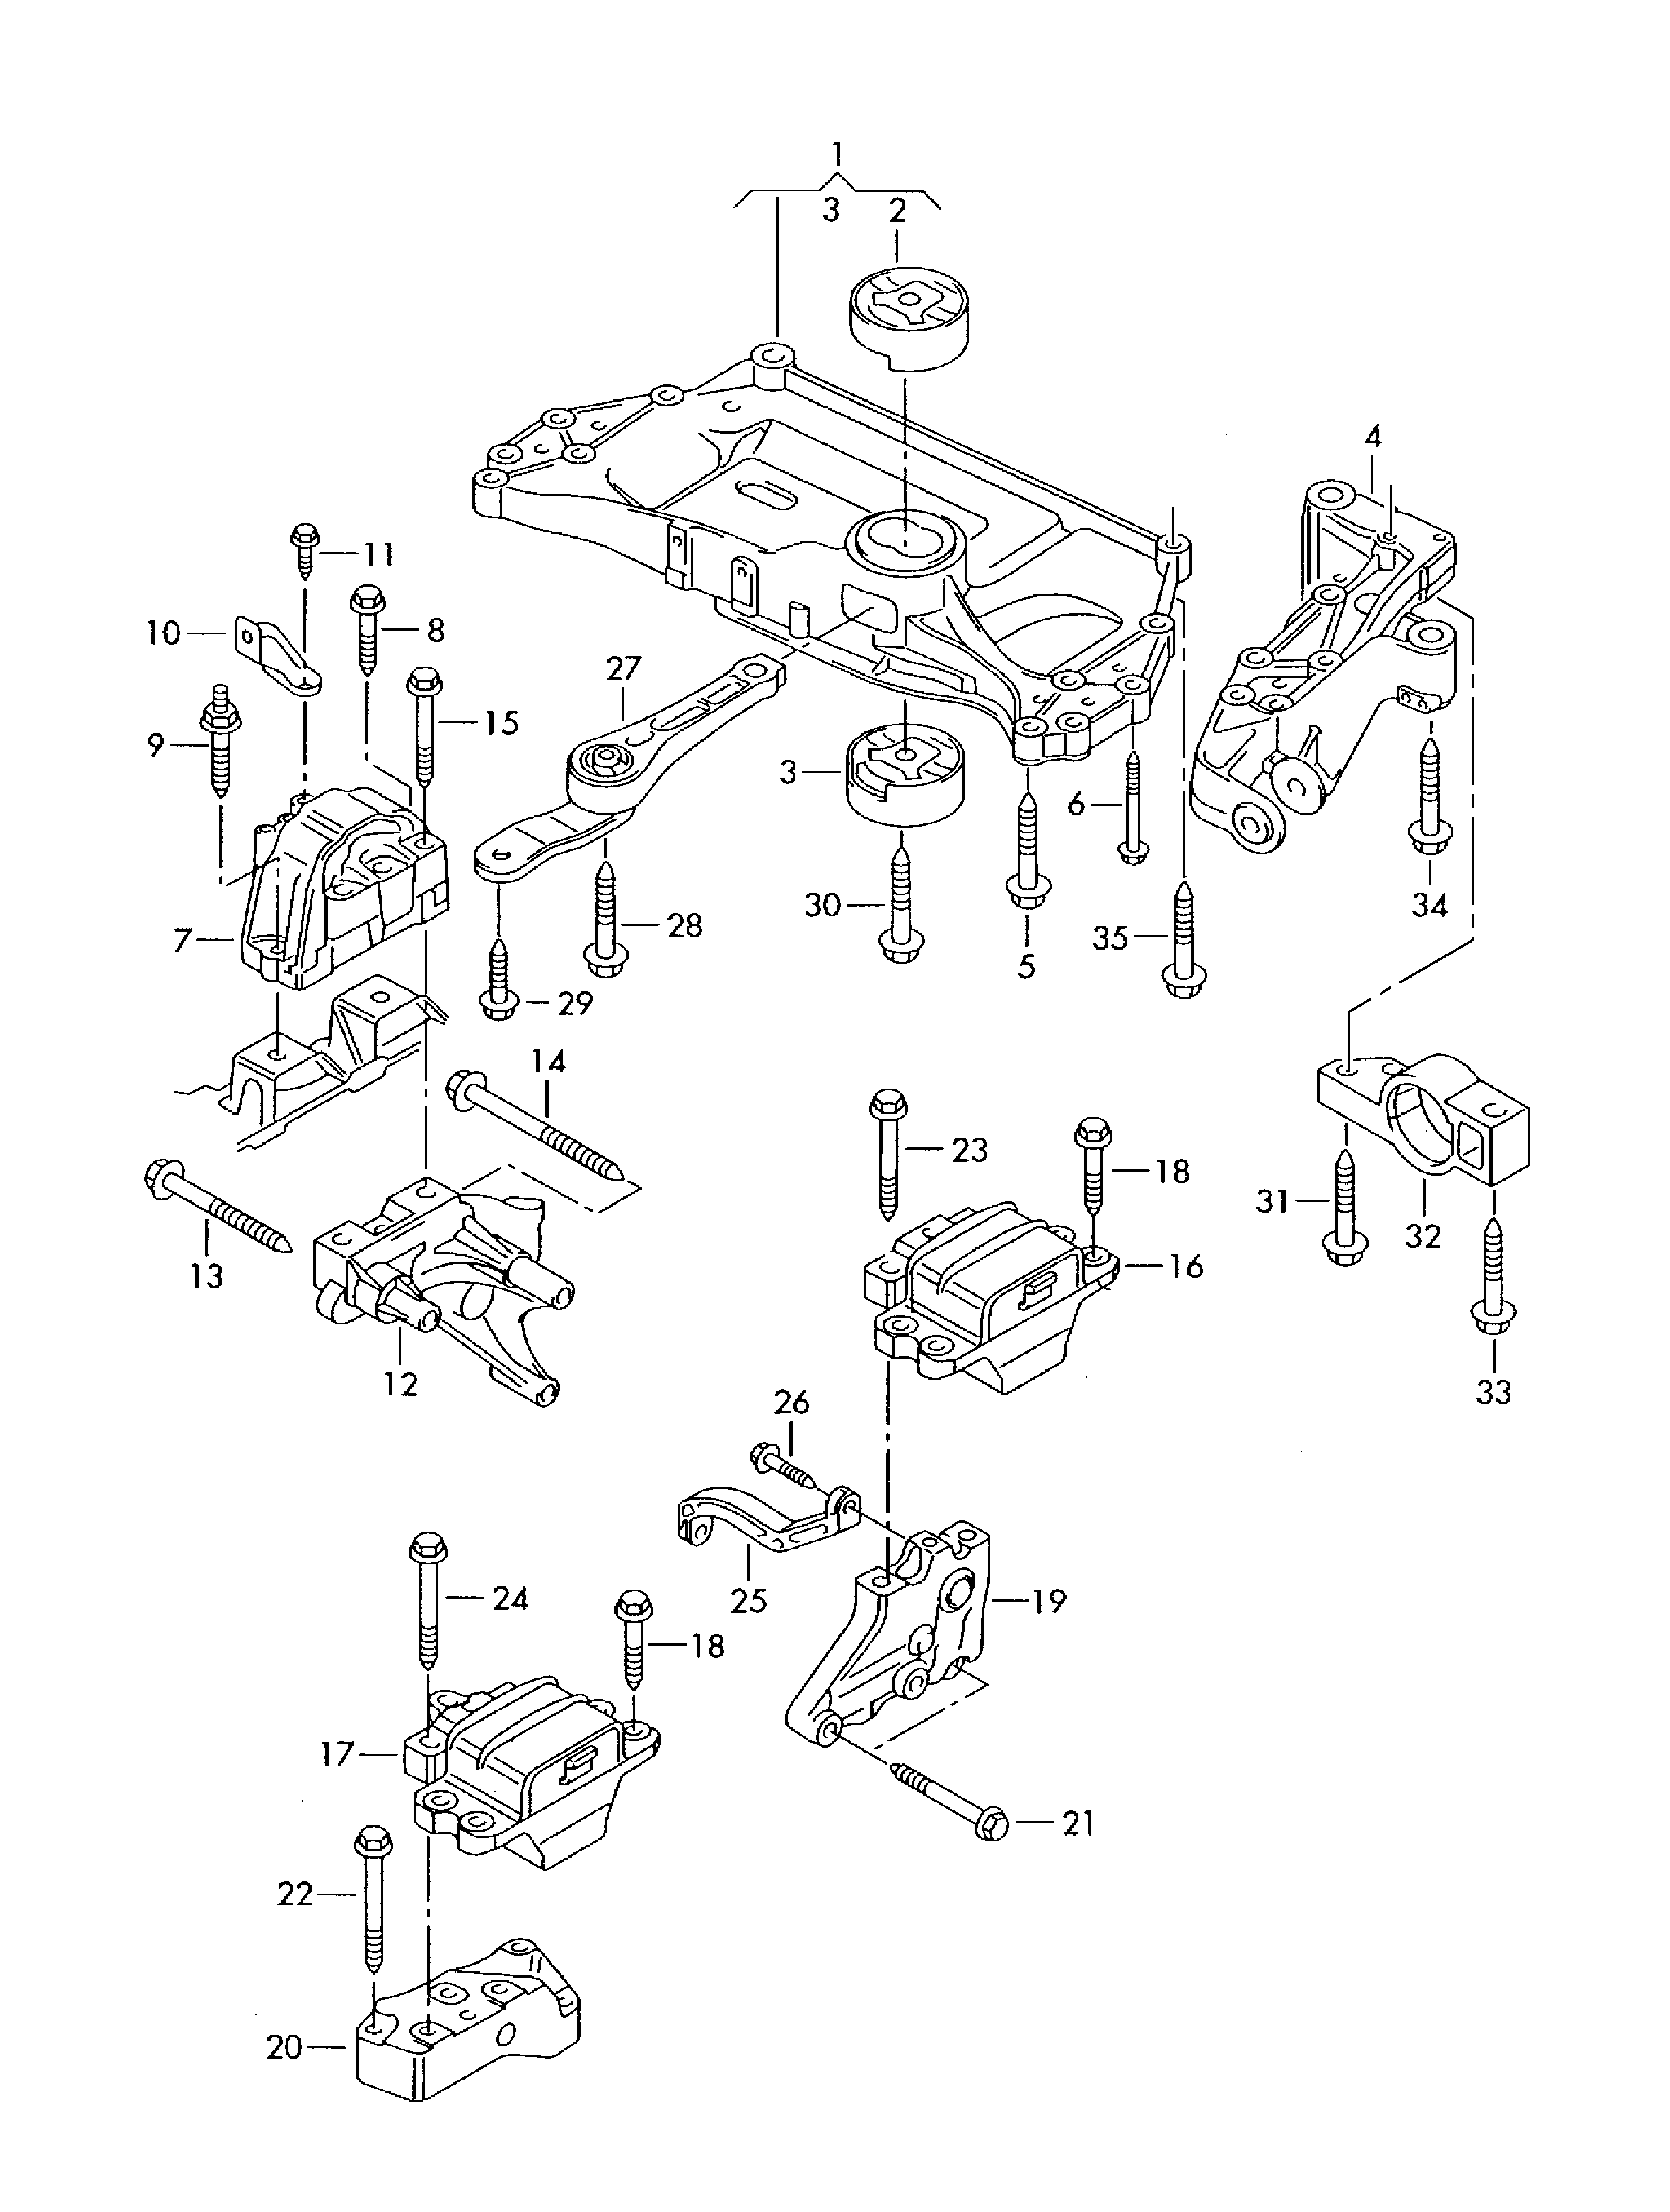 mounting parts for engine and<br>transmission  - Jetta - je